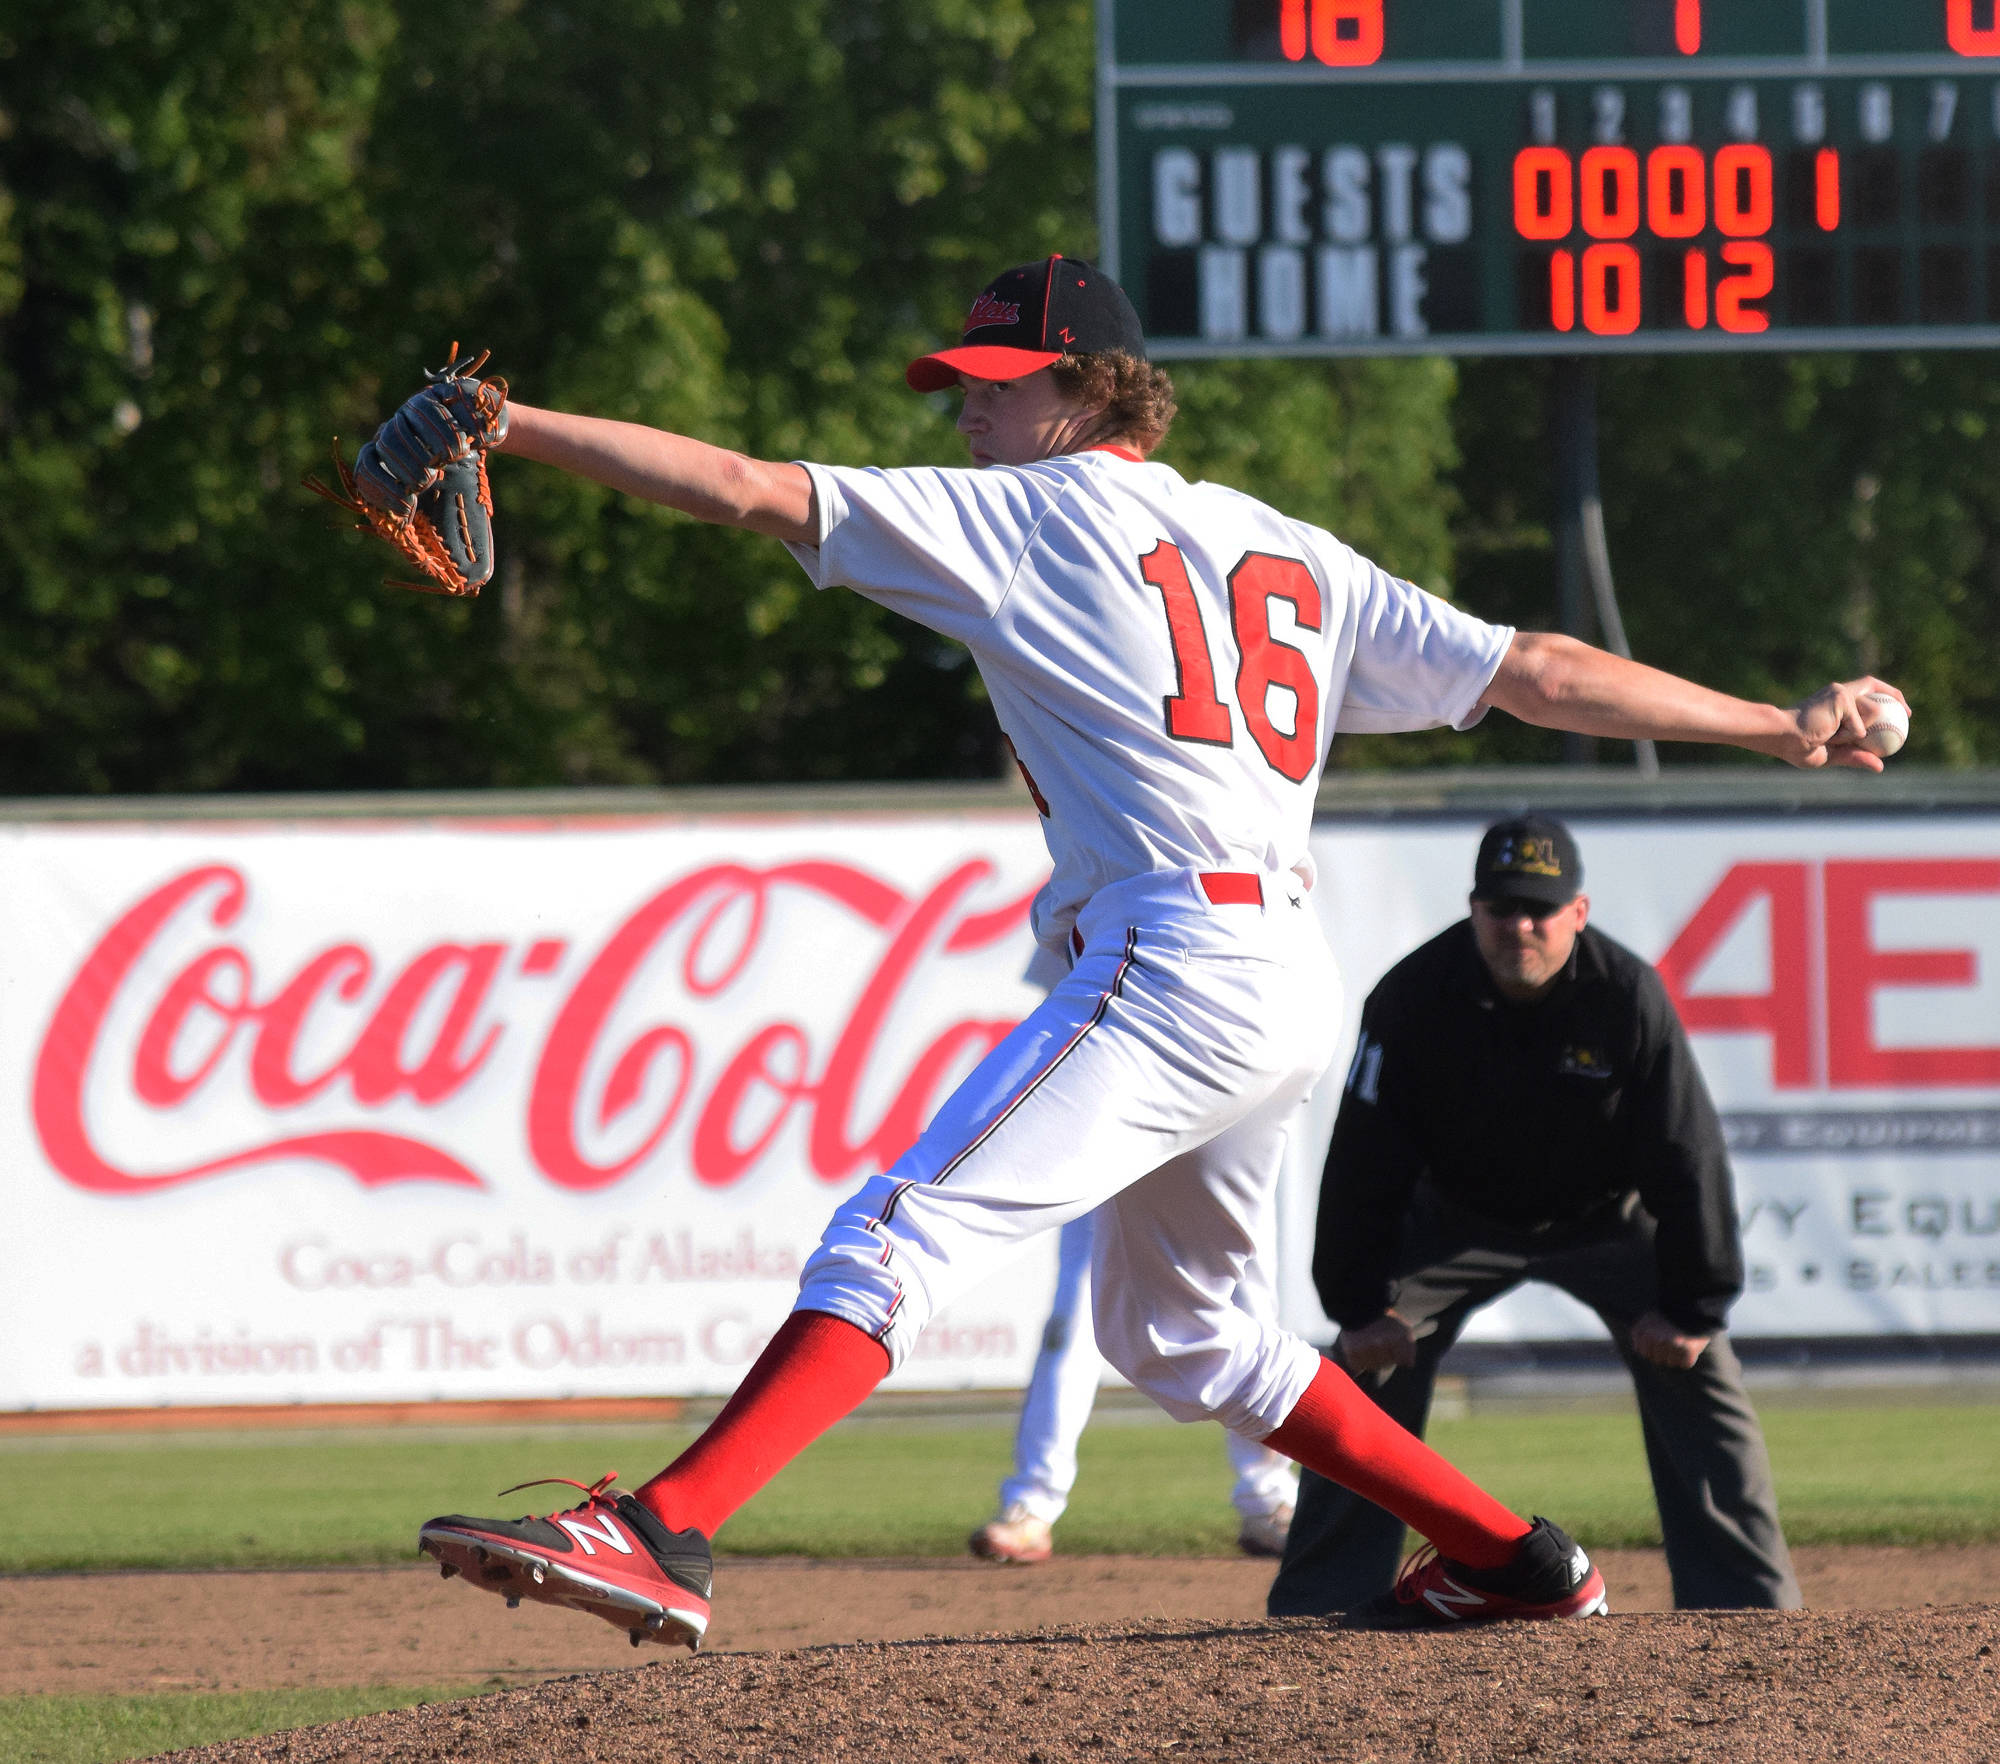 Peninsula Oilers pitcher and 2016 Soldotna High School graduate Joey Becher offers up a pitch to the Anchorage Glacier Pilots midway through an Alaska Baseball League contest June 24, 2017, at Coral Seymour Memorial Ballpark in Kenai. (Photo by Joey Klecka/Peninsula Clarion)